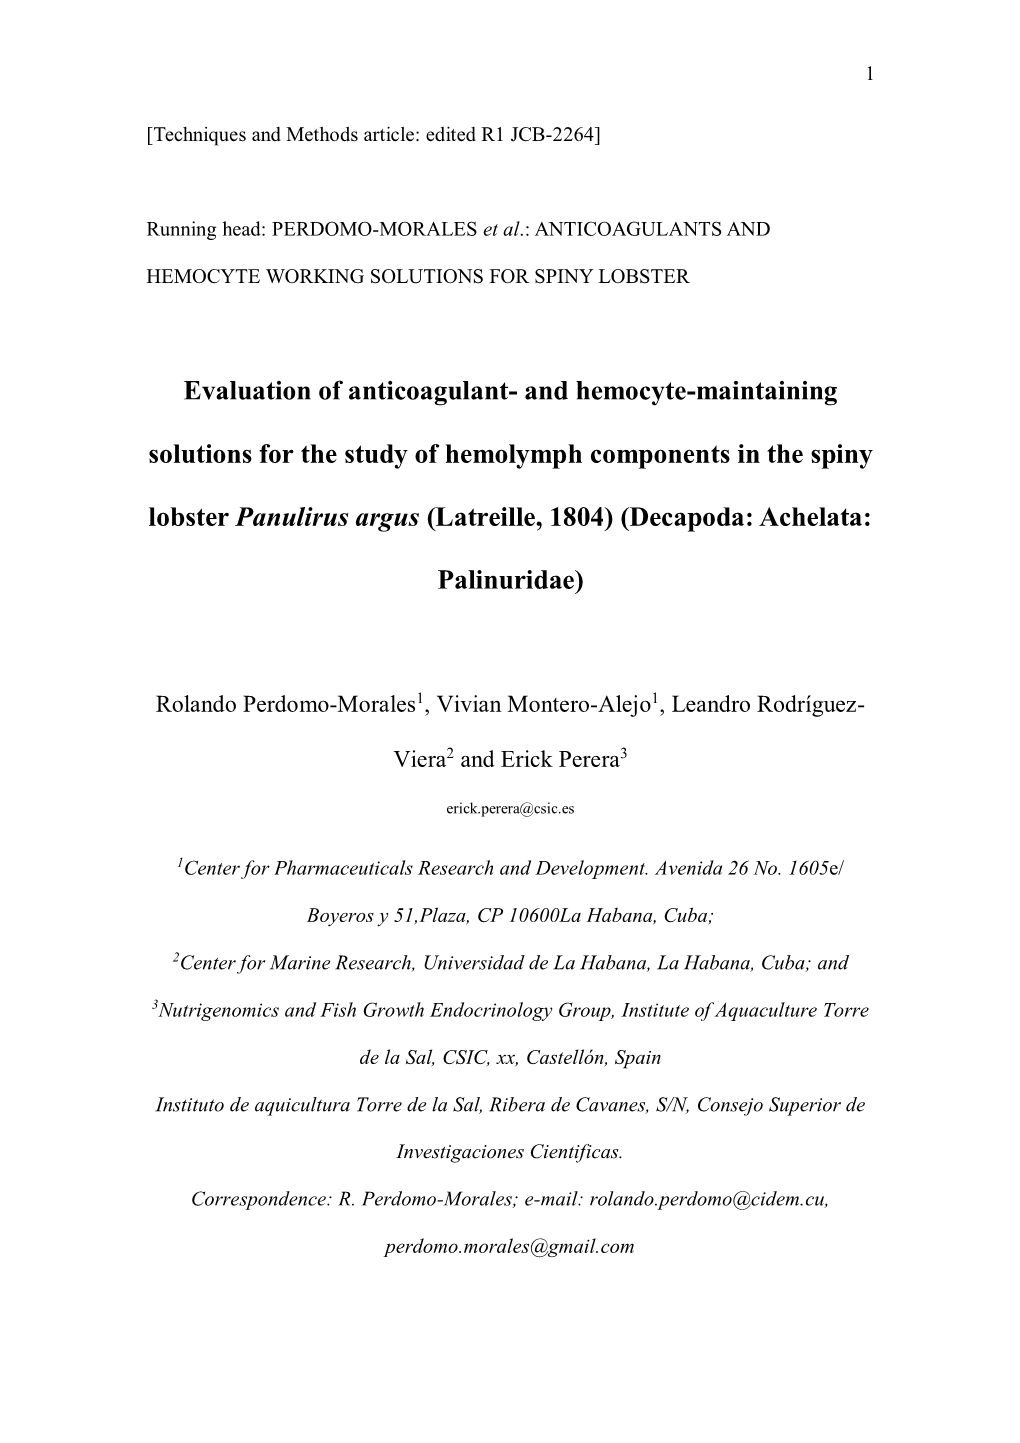 Evaluation of Anticoagulant- and Hemocyte-Maintaining Solutions For